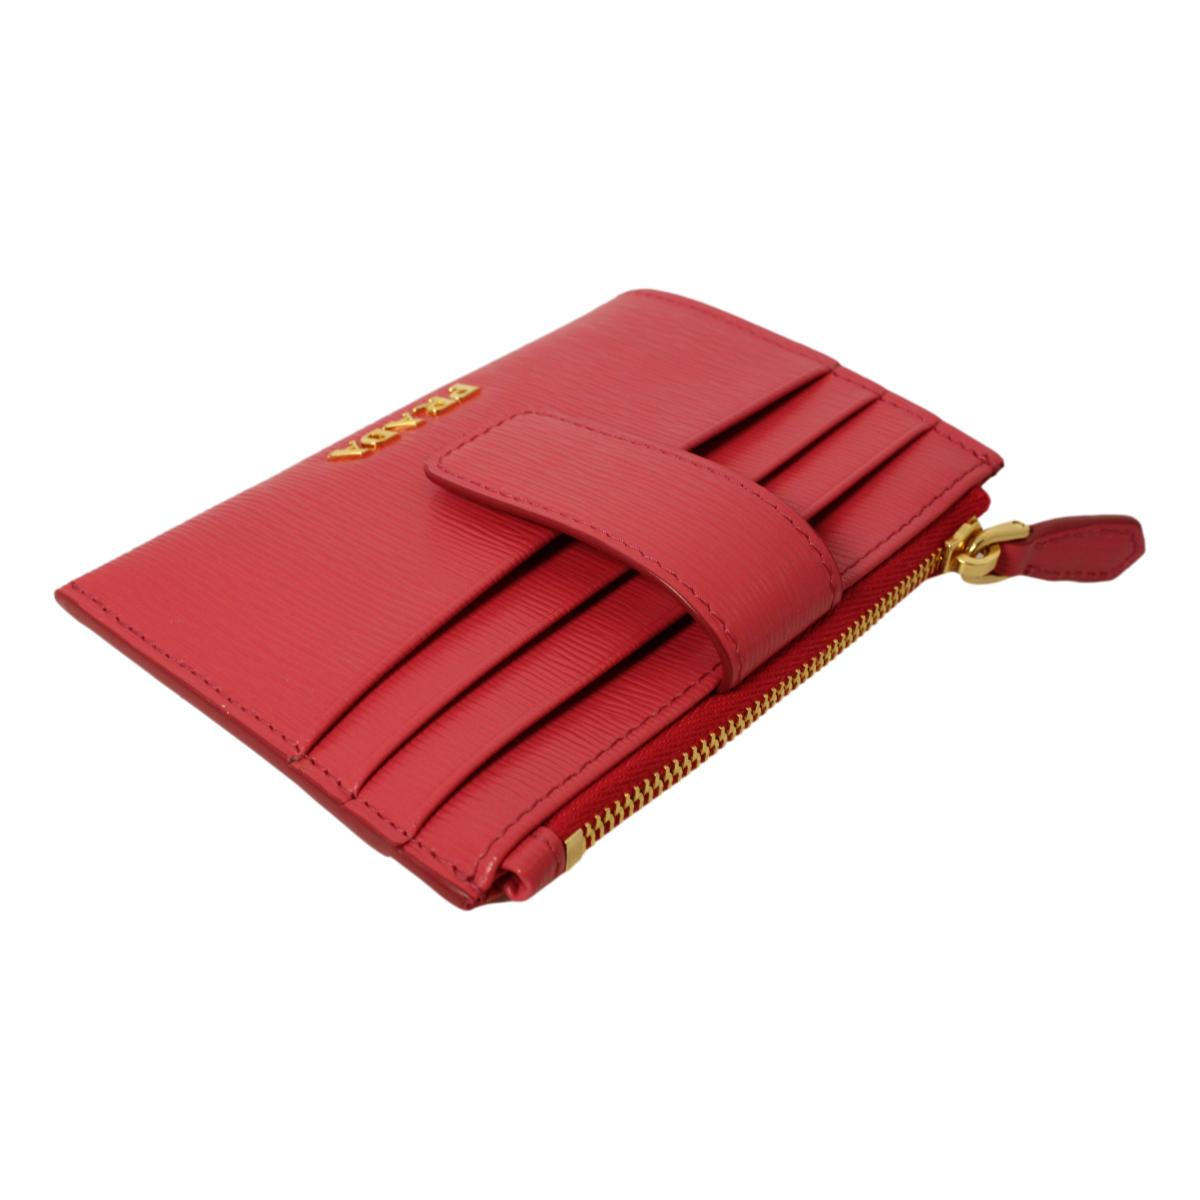 Prada Vitello Move Peonia Pink Leather Zip Top Card Wallet 1MC026 at_Queen_Bee_of_Beverly_Hills